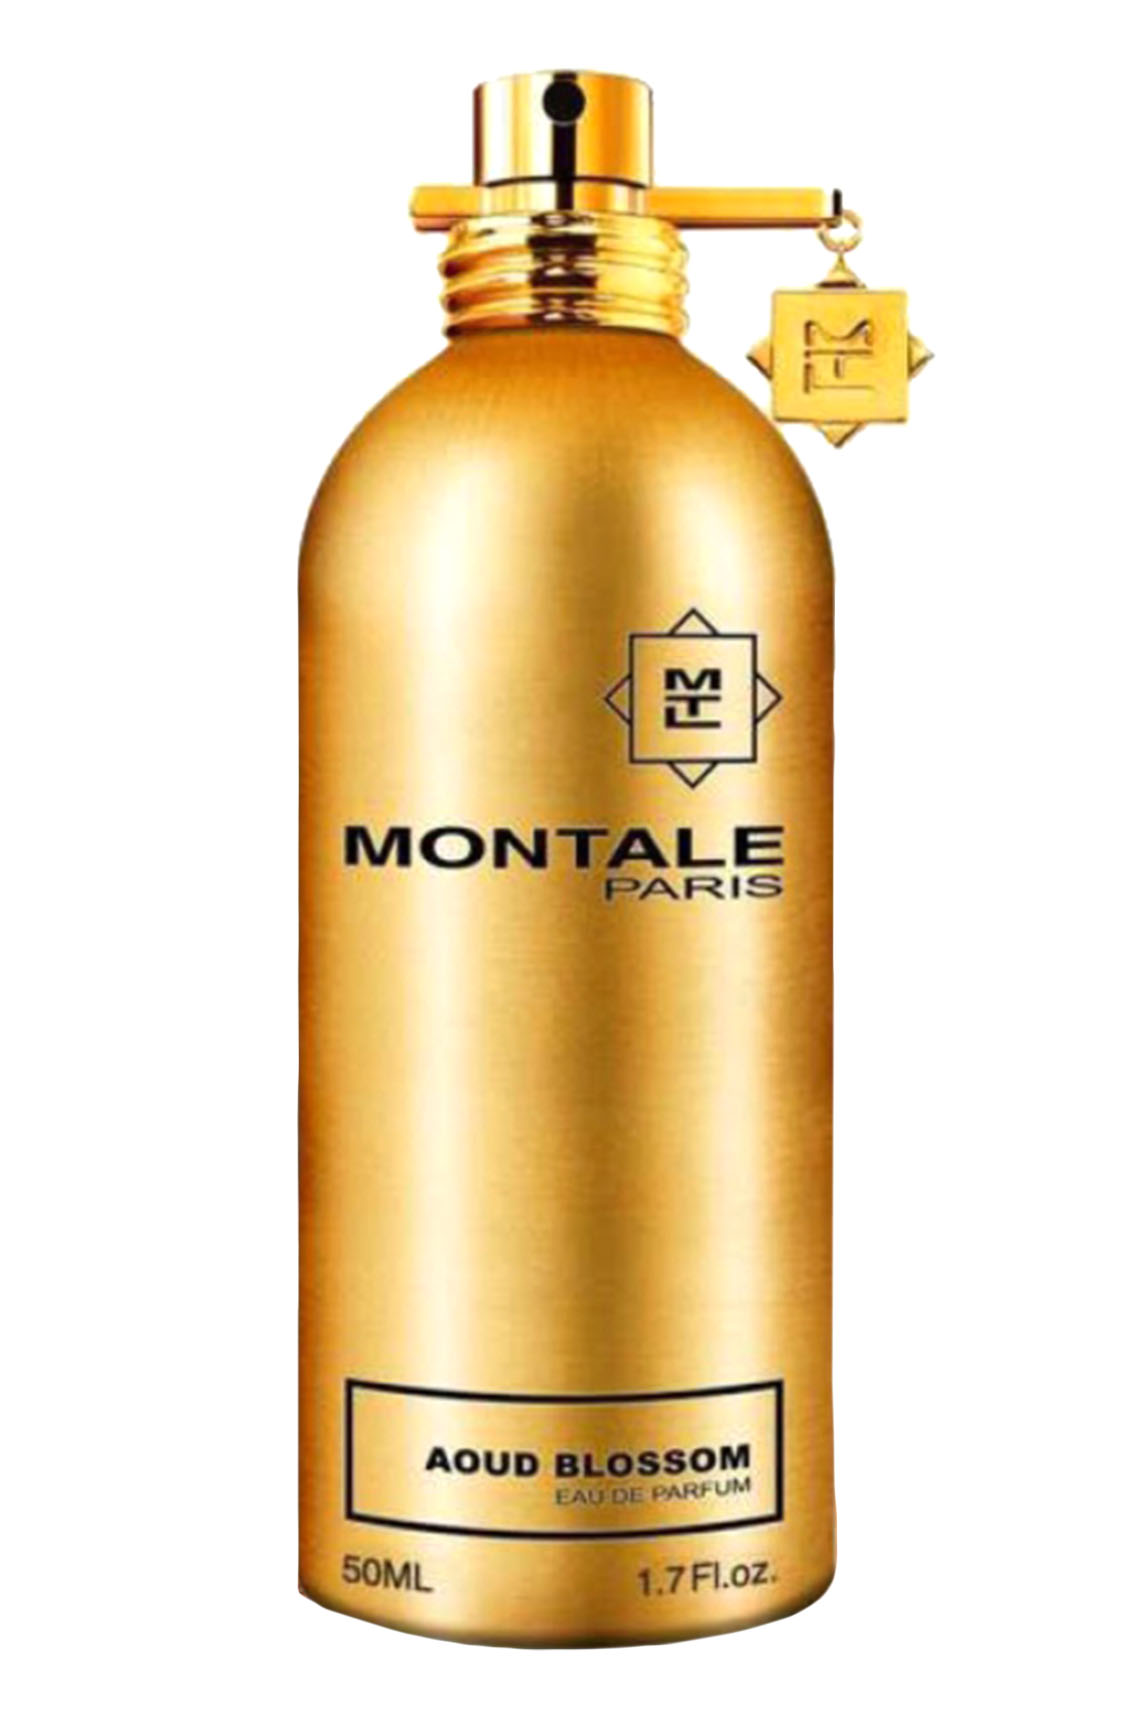 Montale vetiver. Монталь Red Vetyver. Montale Paris духи мужские. Духи Монталь Aoud Red. Парфюмерная вода Montale Red Vetyver.